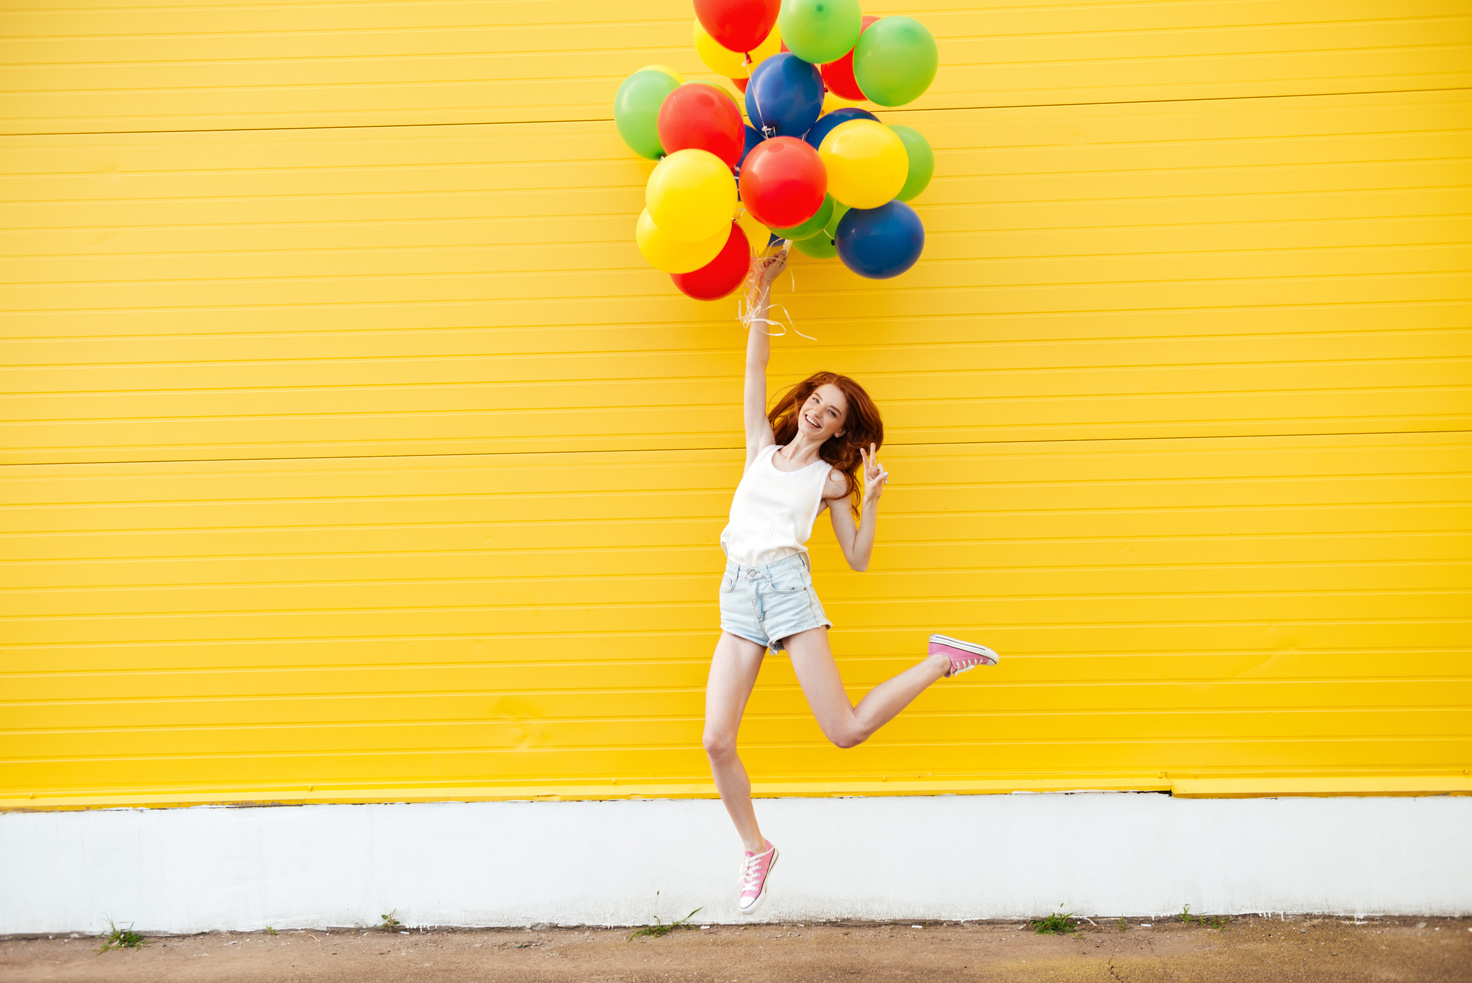 Woman Jumping with Balloons